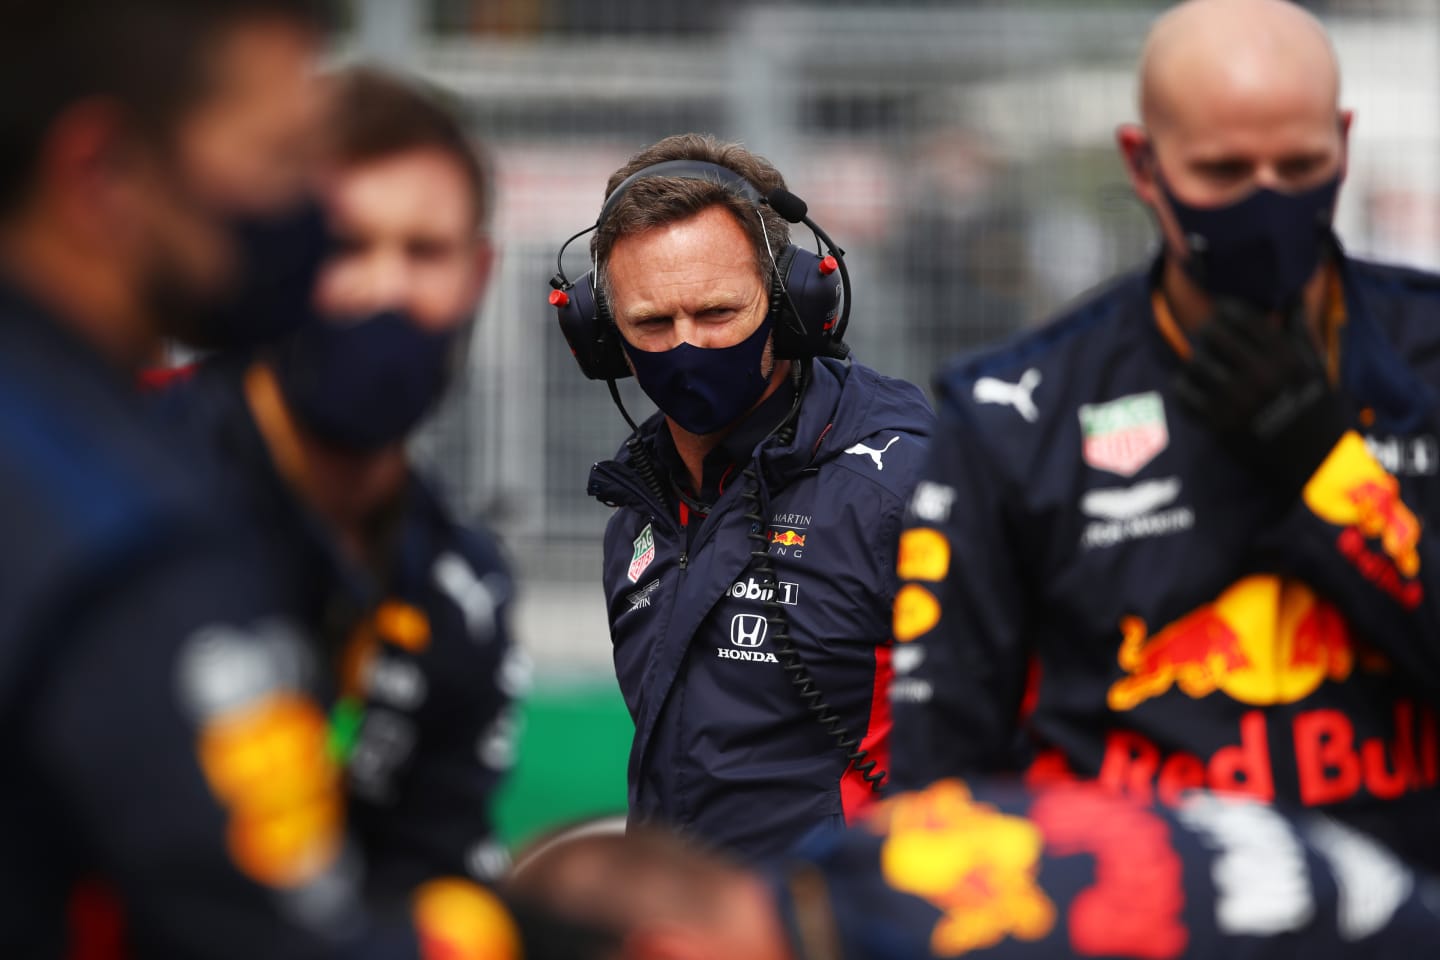 BUDAPEST, HUNGARY - JULY 19: Red Bull Racing Team Principal Christian Horner is seen on the grid